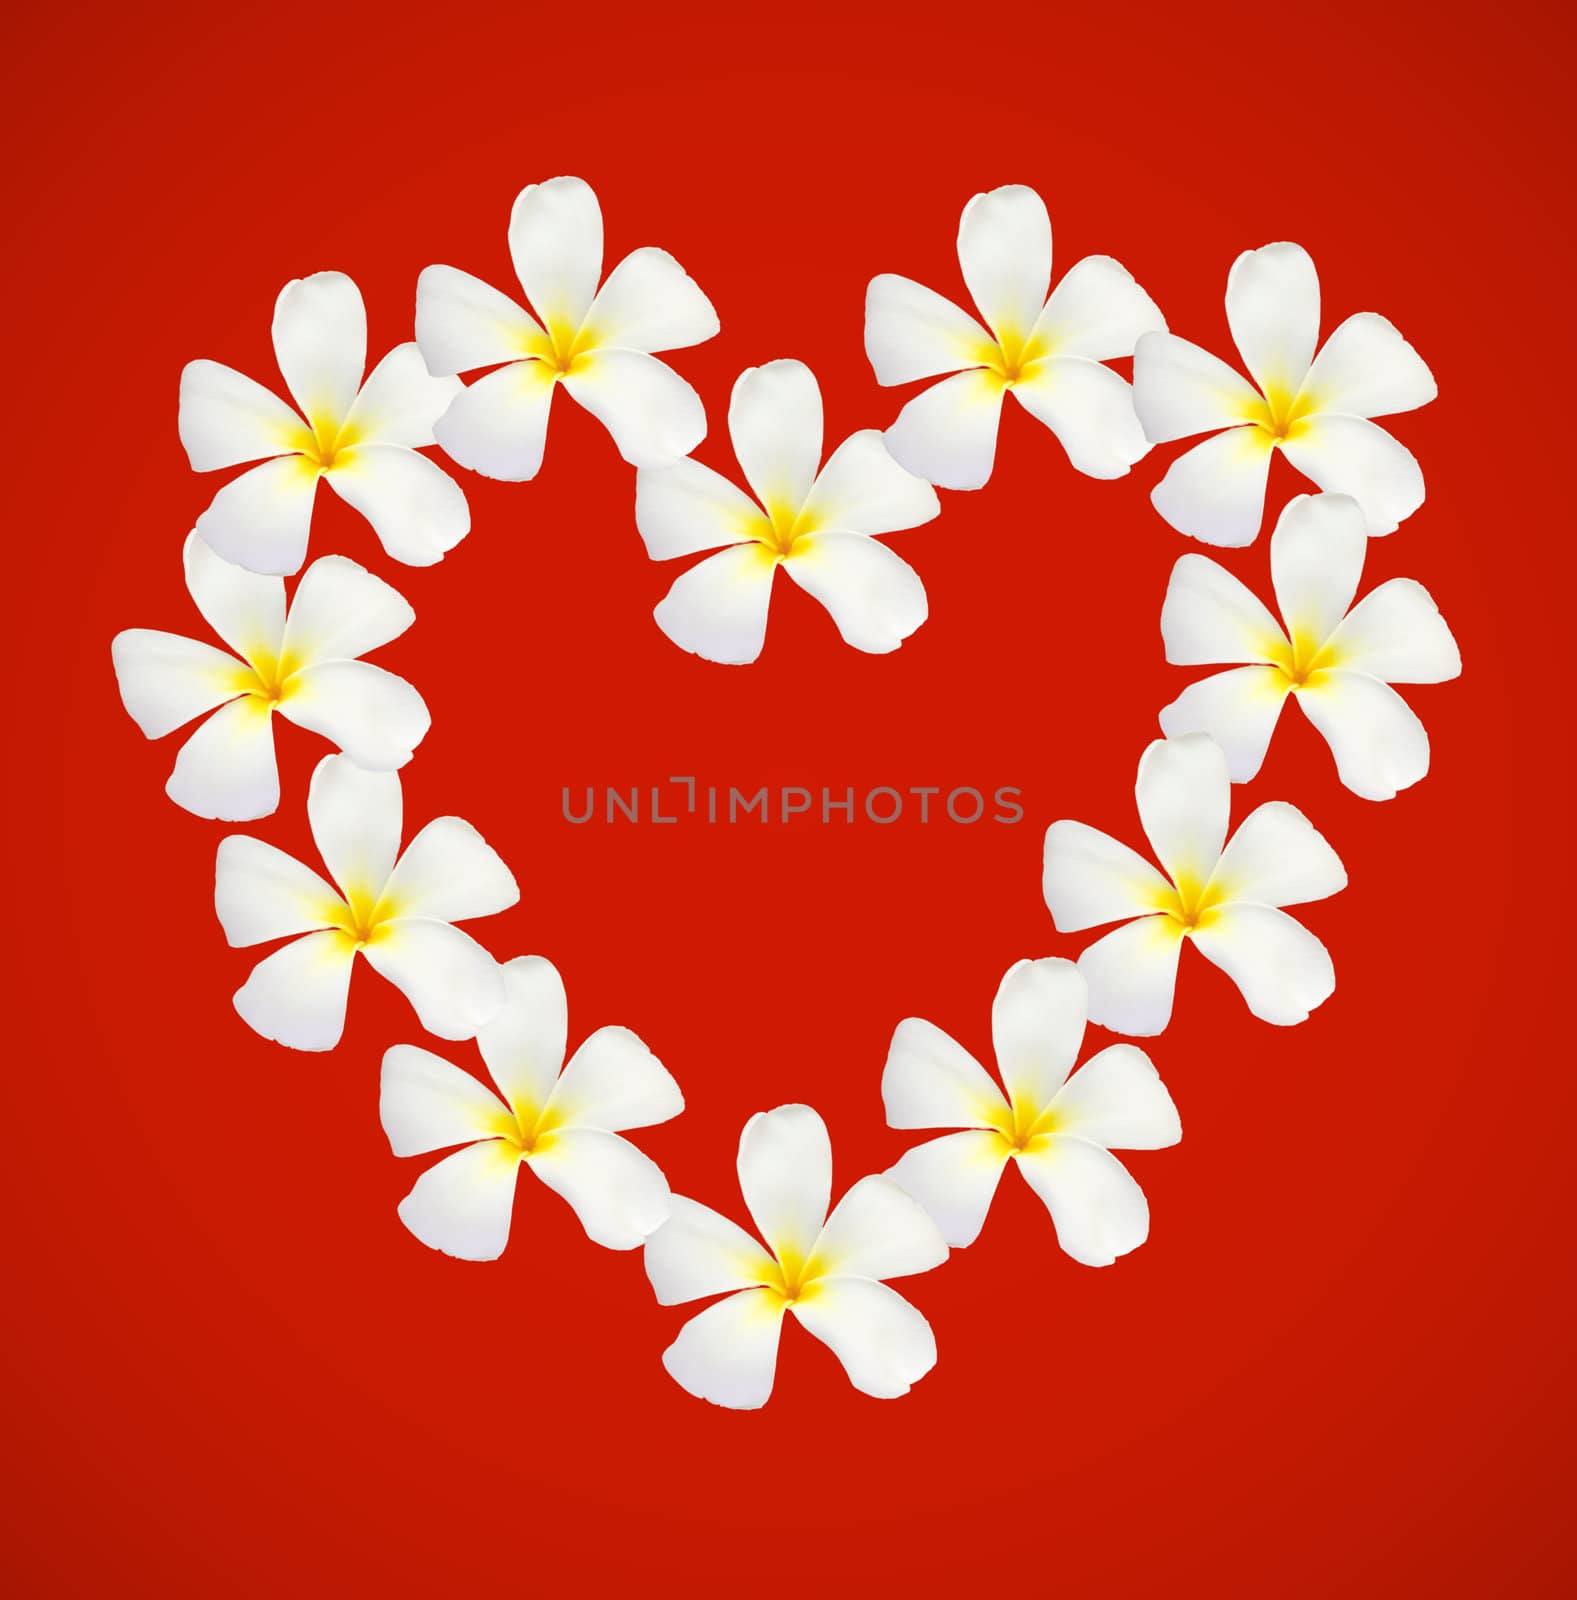 frangipani shape as heart isolated on red background